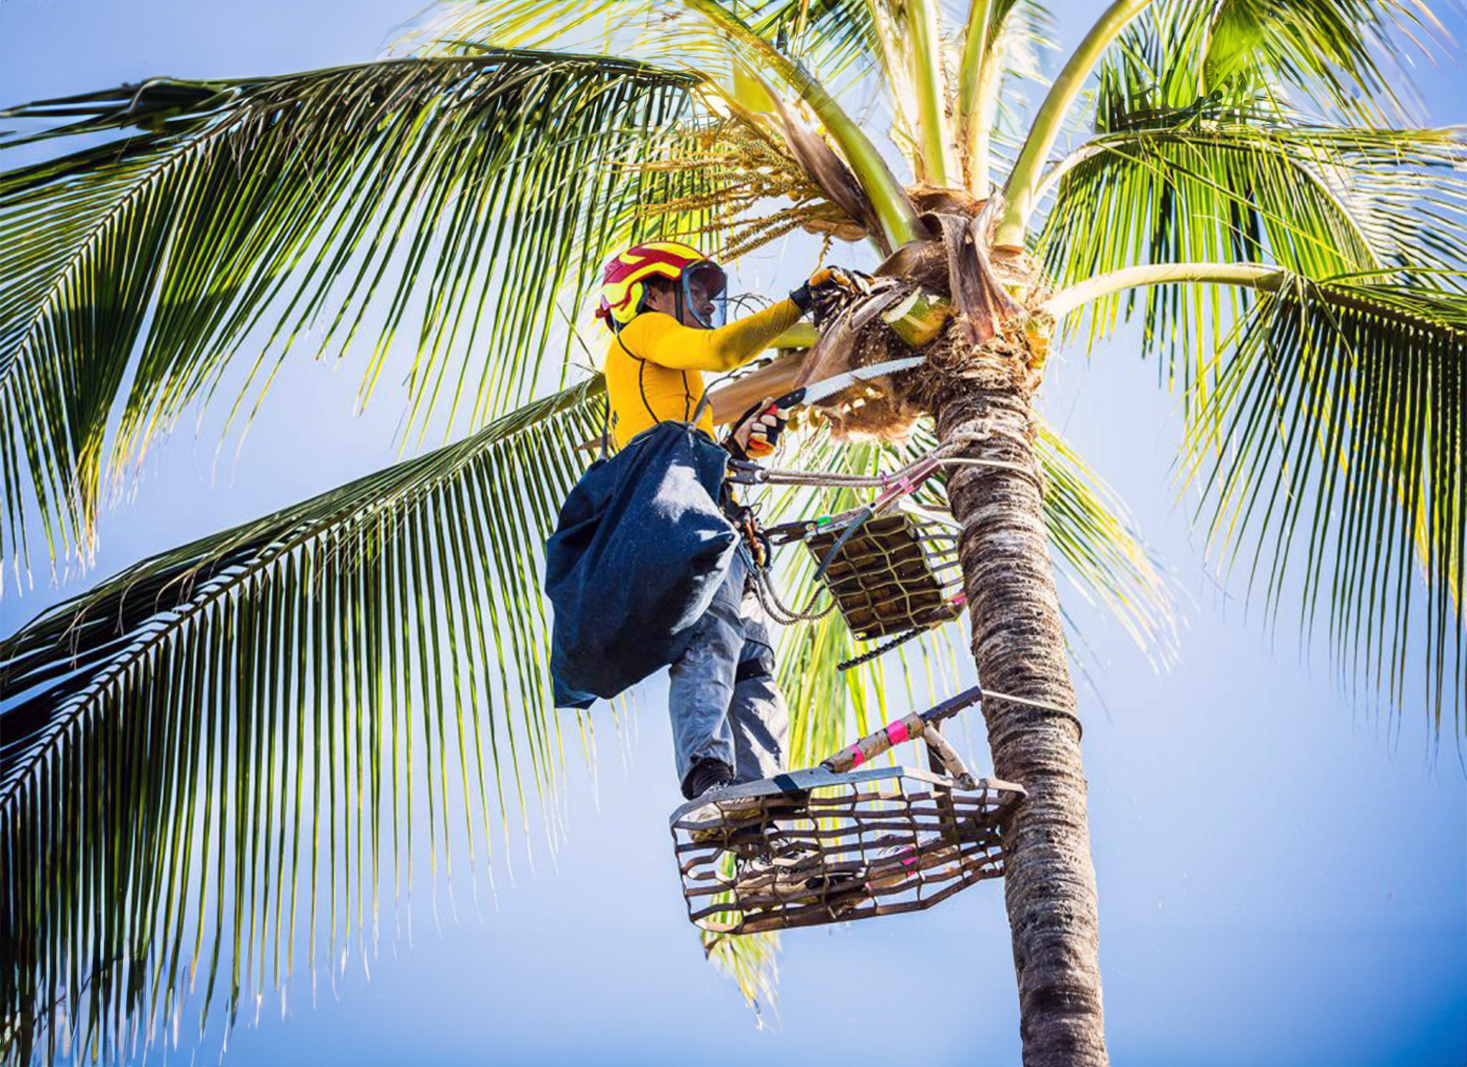 Palm tree trimming cost in Hawaii